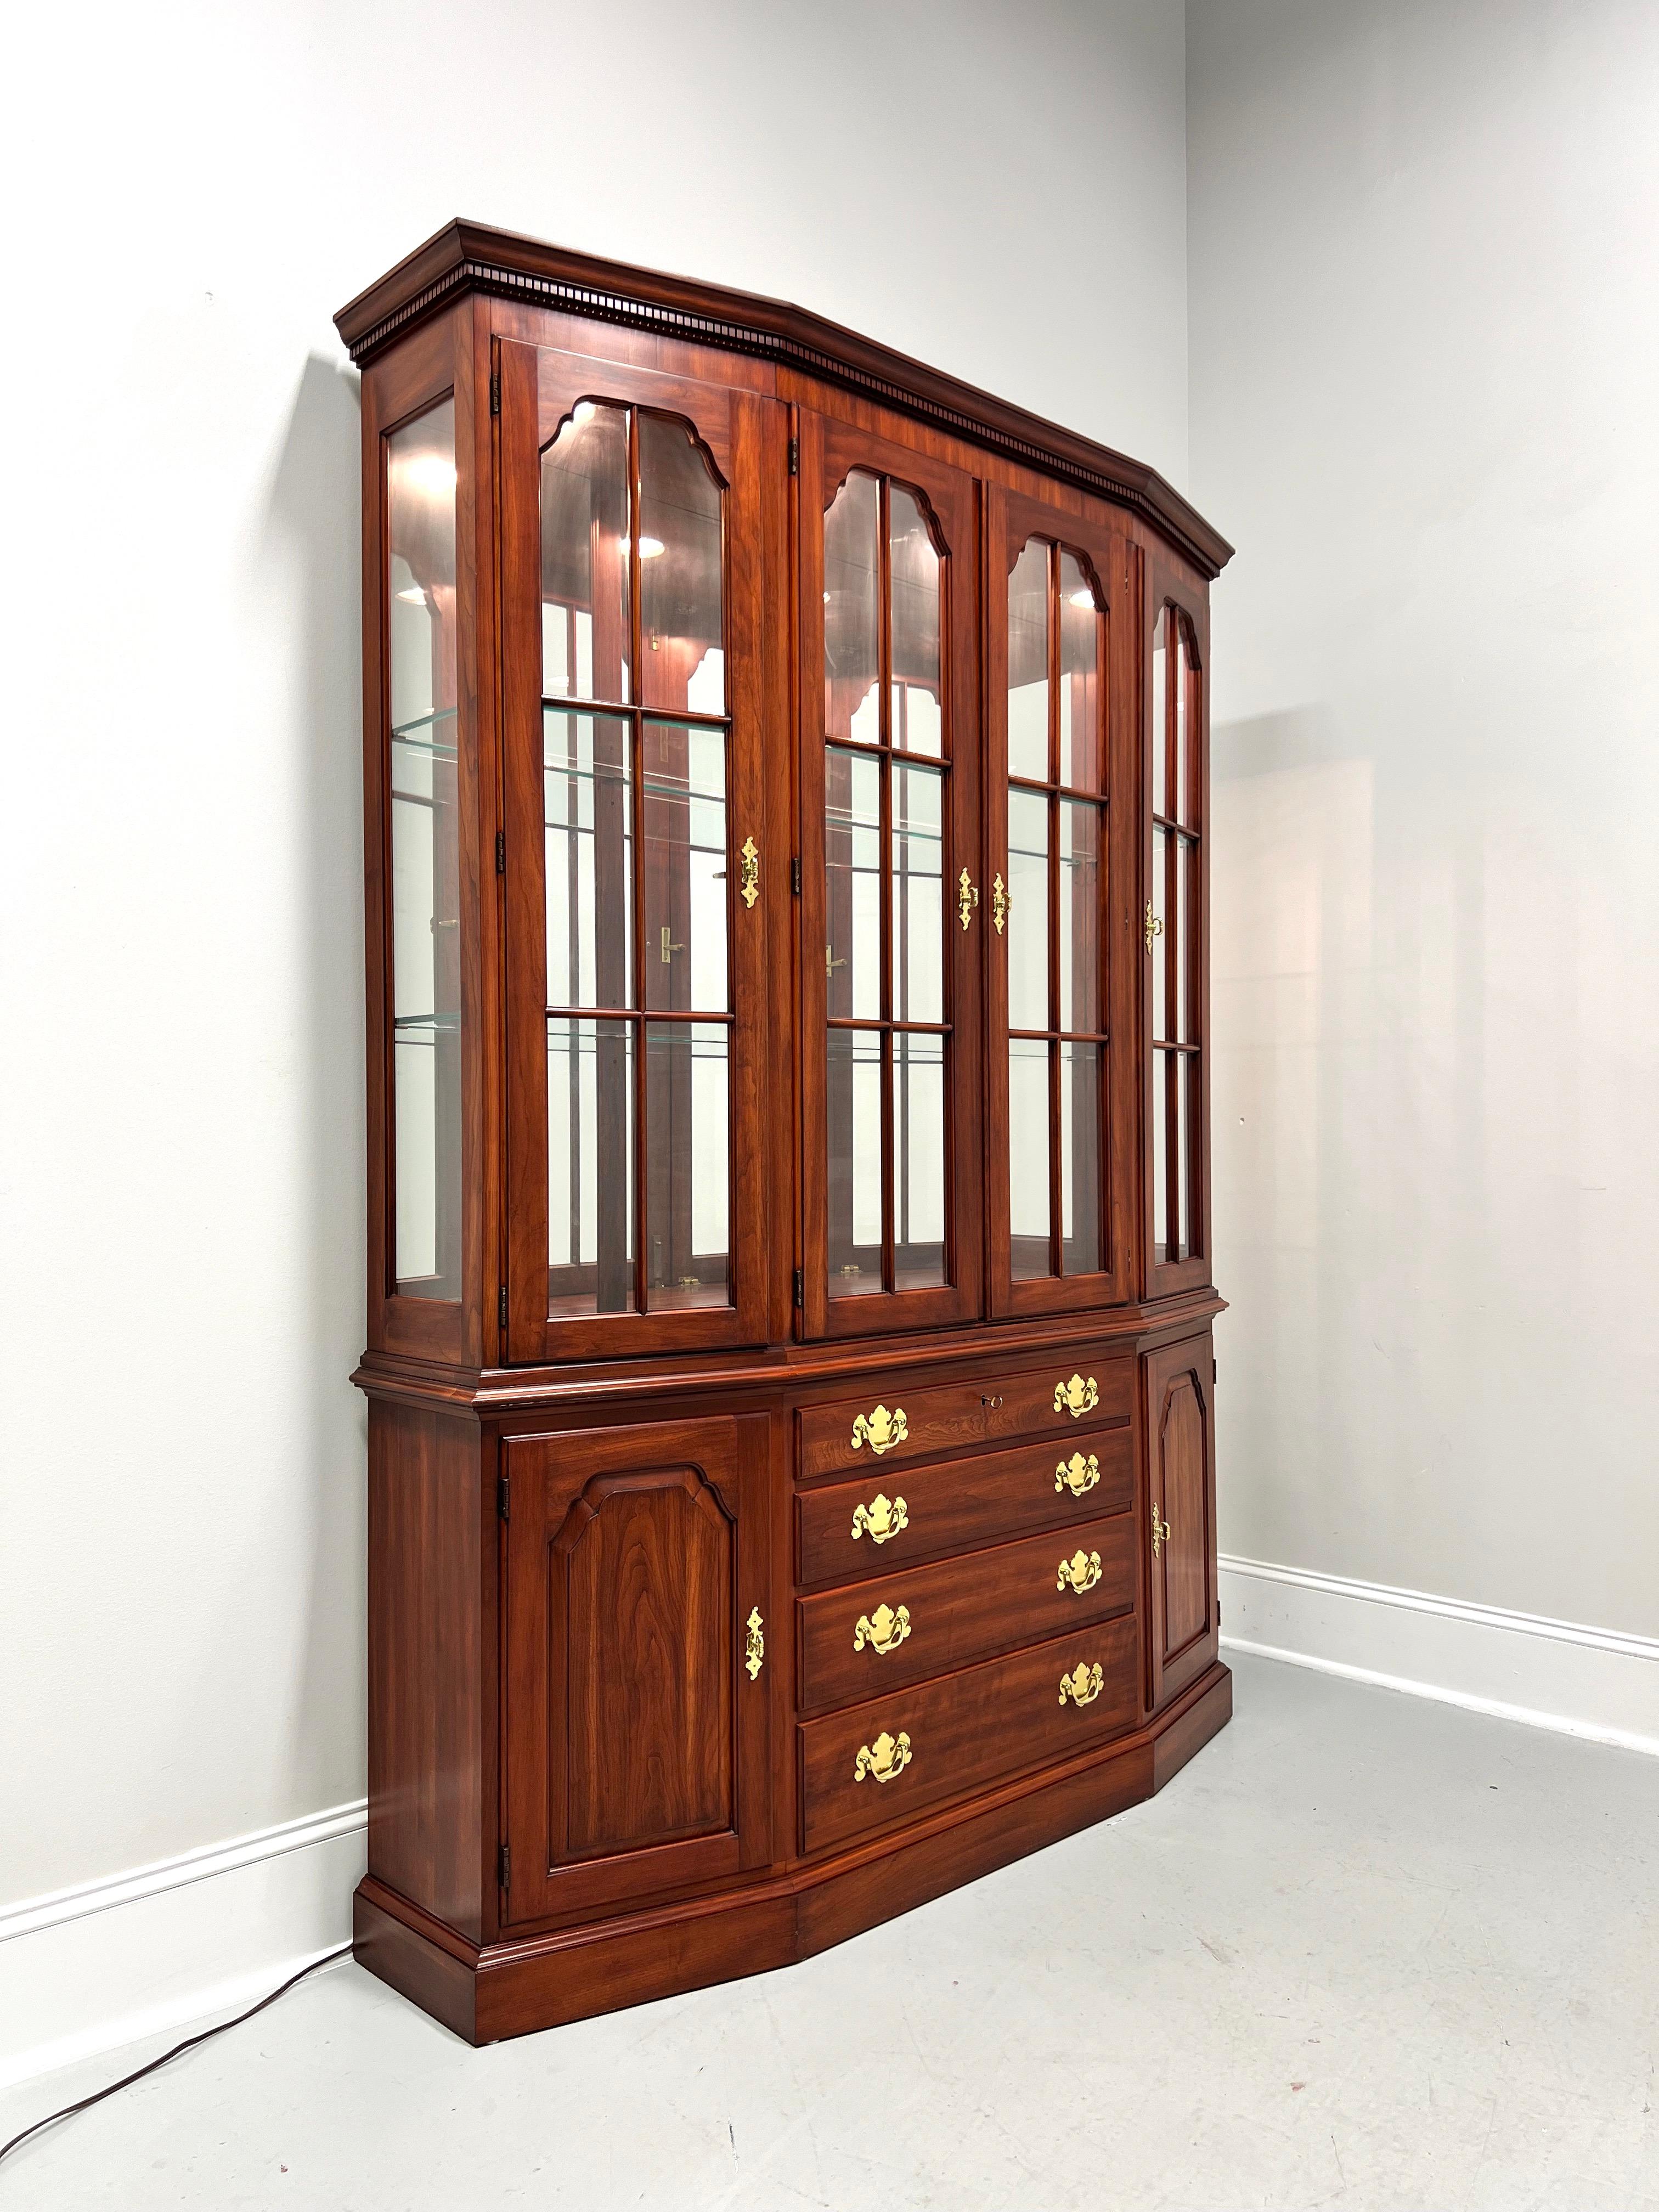 A Traditional style china cabinet by Henkel Harris, of Winchester, Virginia, USA. Solid wild black cherry wood, canted shape, brass hardware, crown & dentil molding at top, ogee edge to lower cabinet, and a solid base. Upper cabinet has four